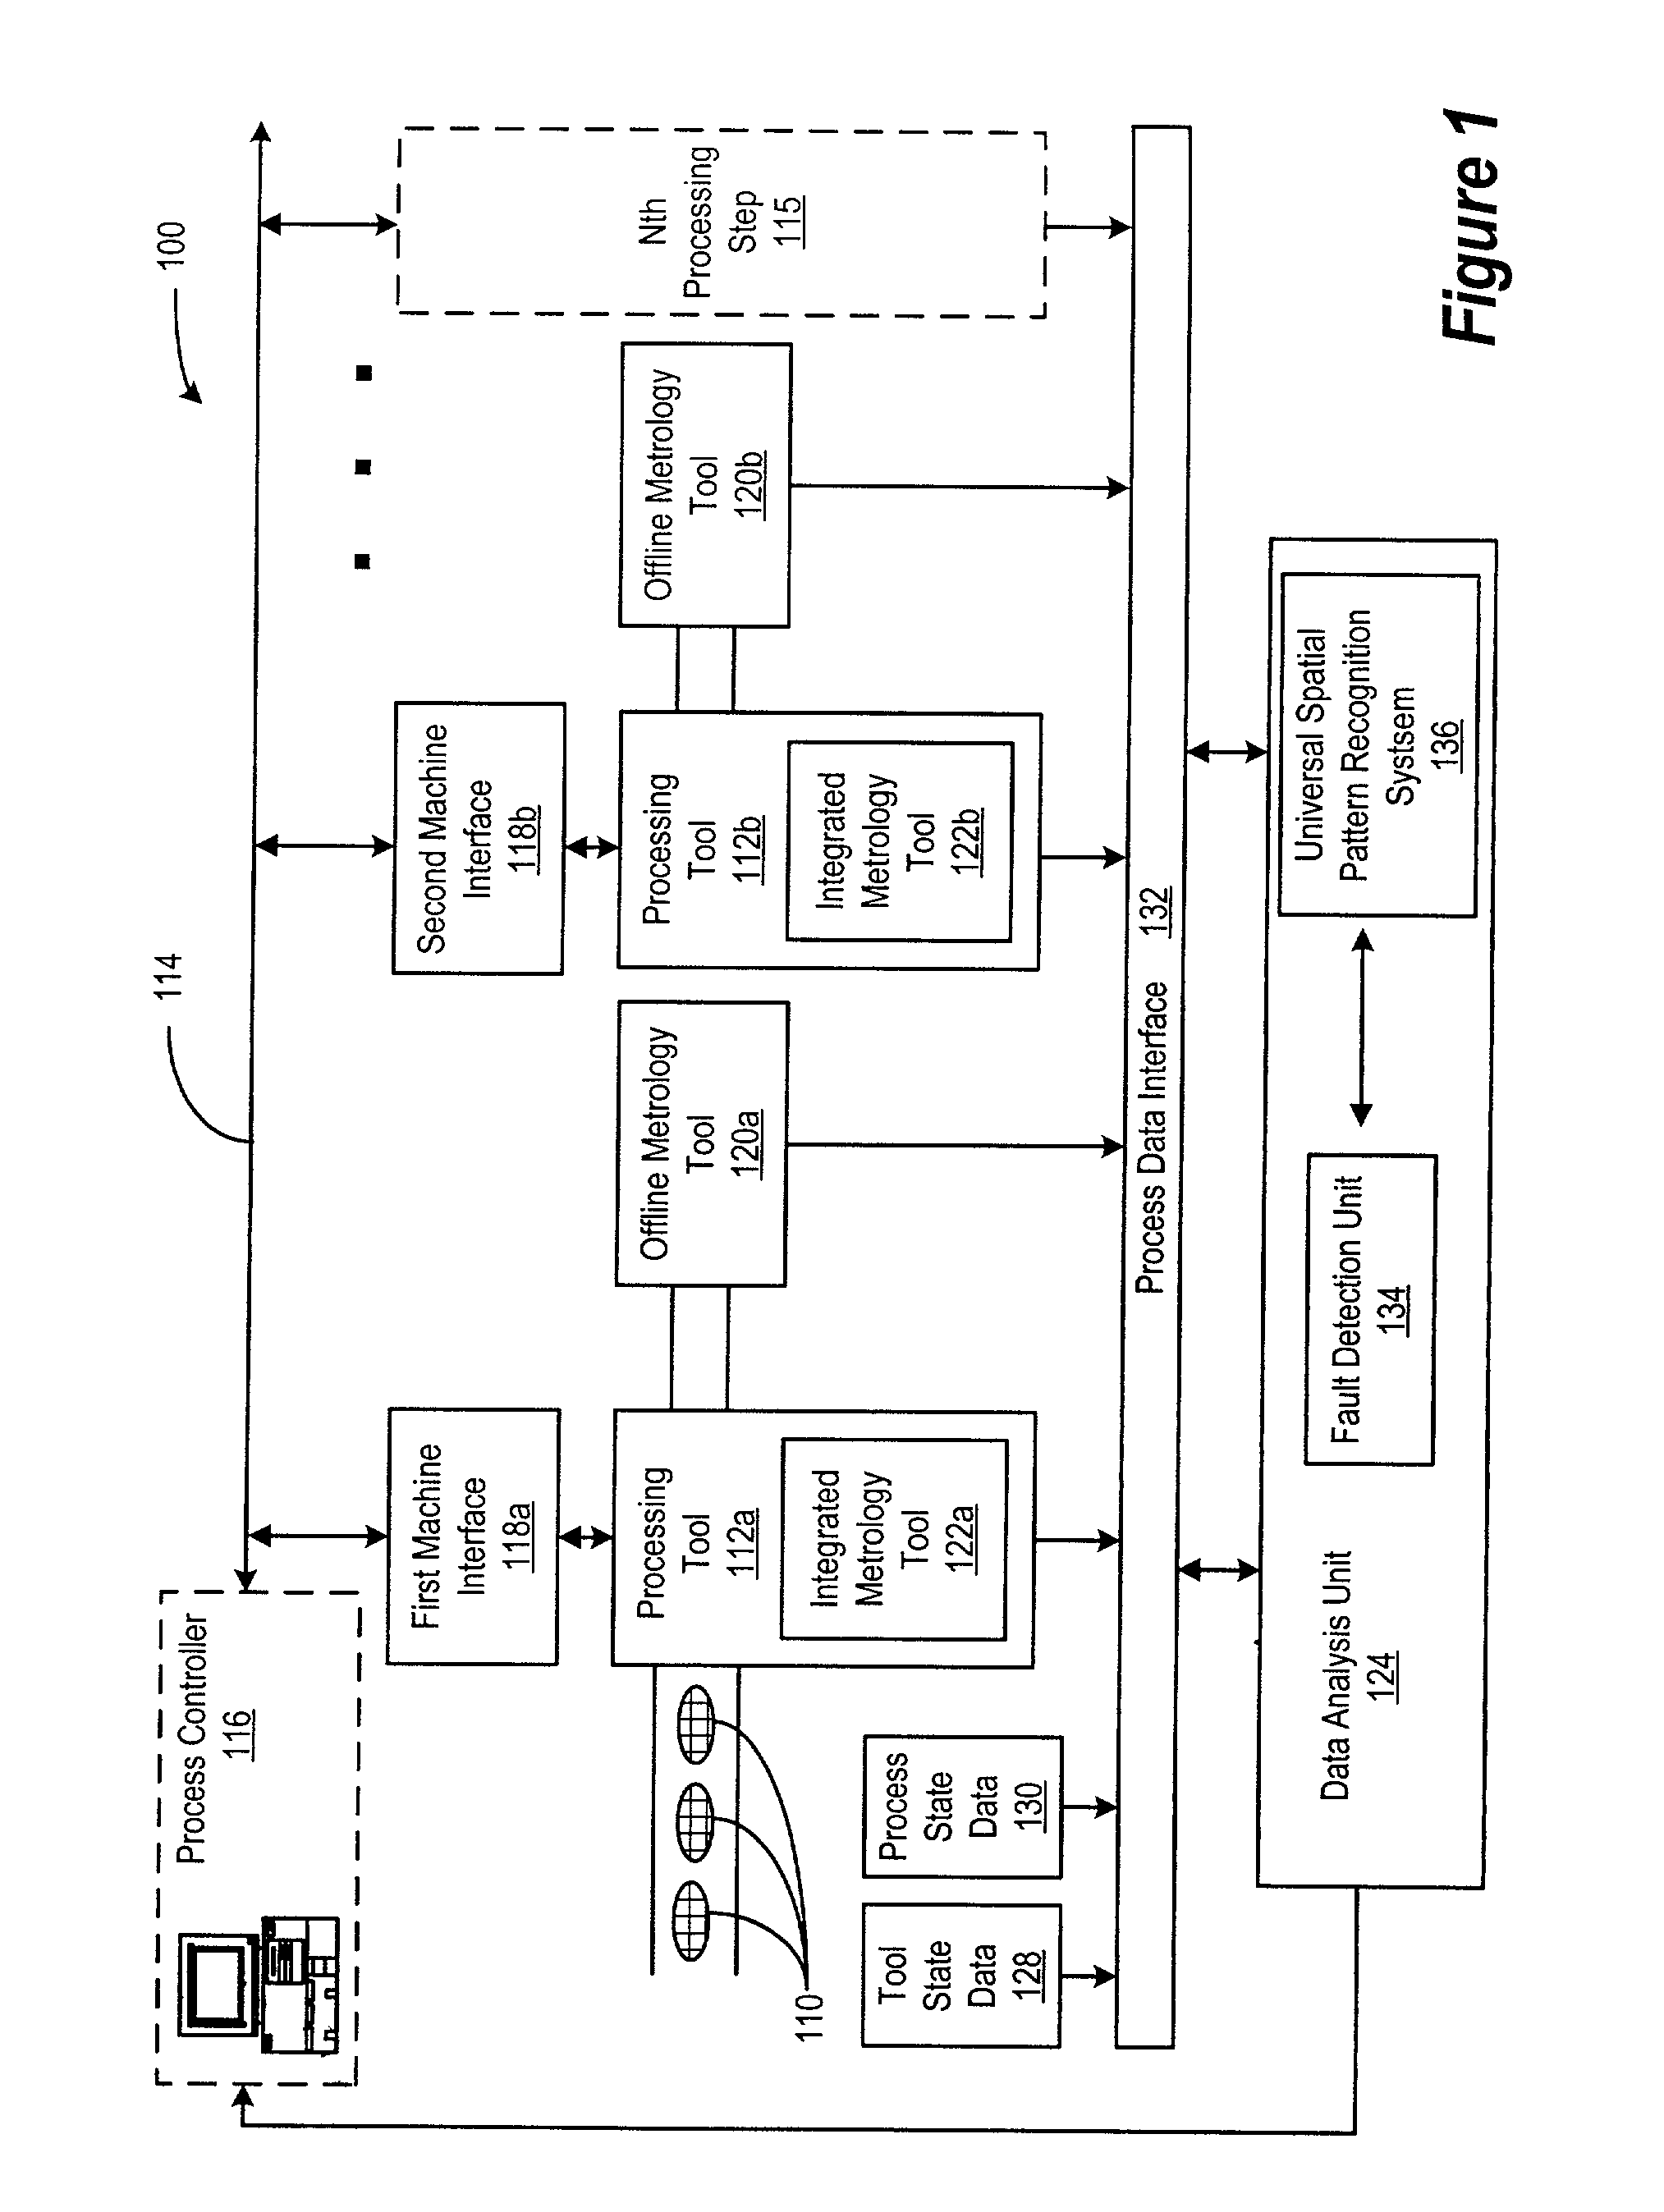 Universal spatial pattern recognition system